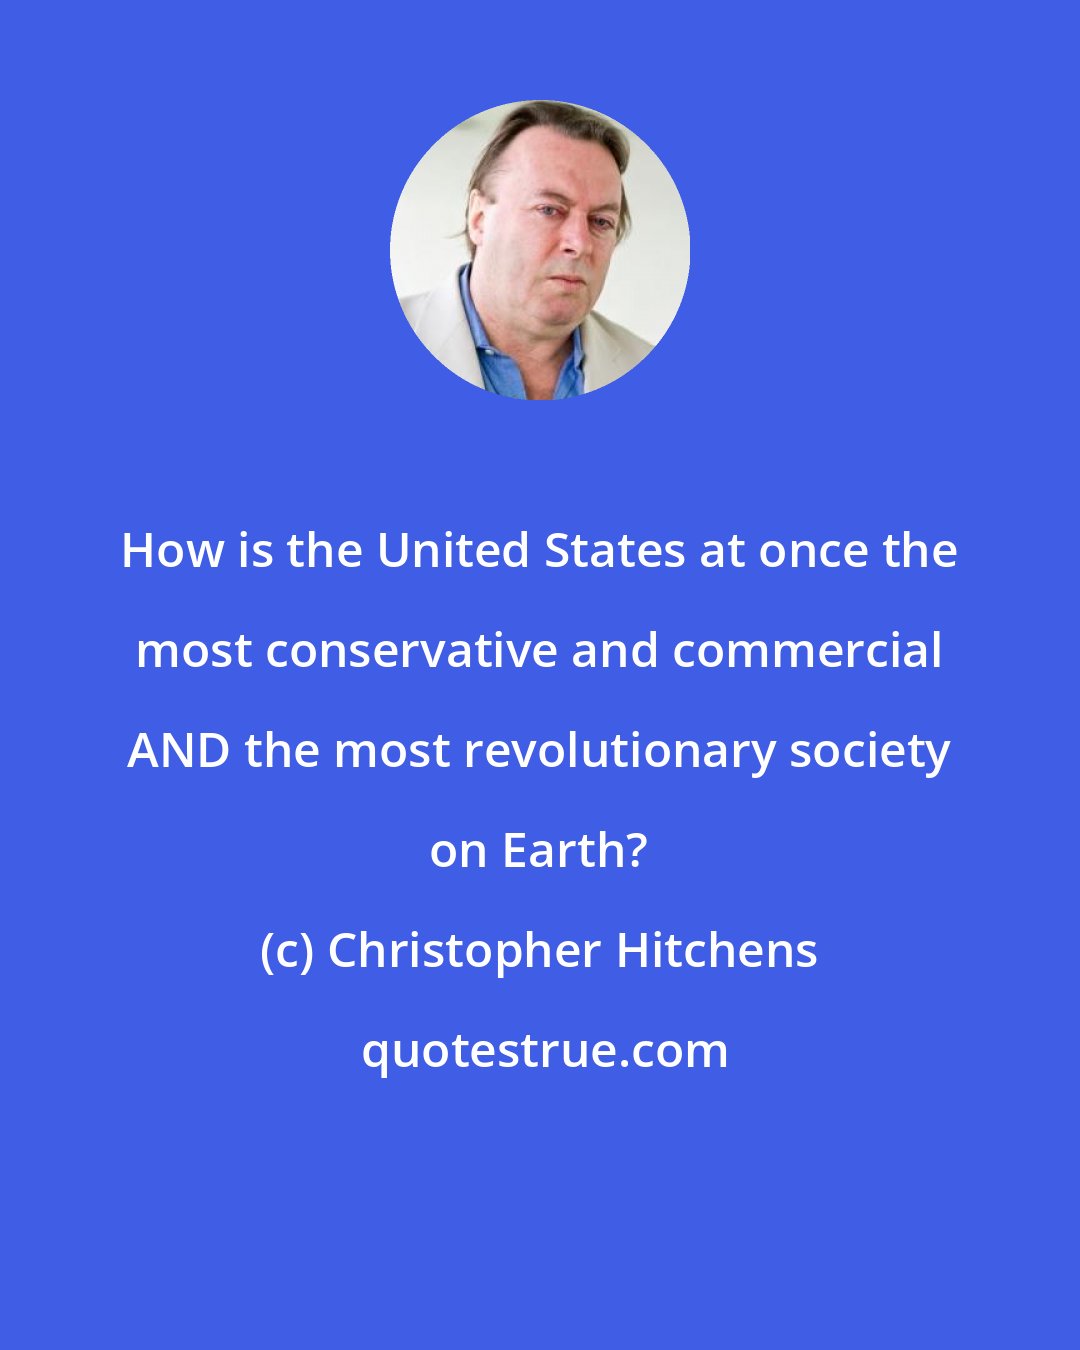 Christopher Hitchens: How is the United States at once the most conservative and commercial AND the most revolutionary society on Earth?